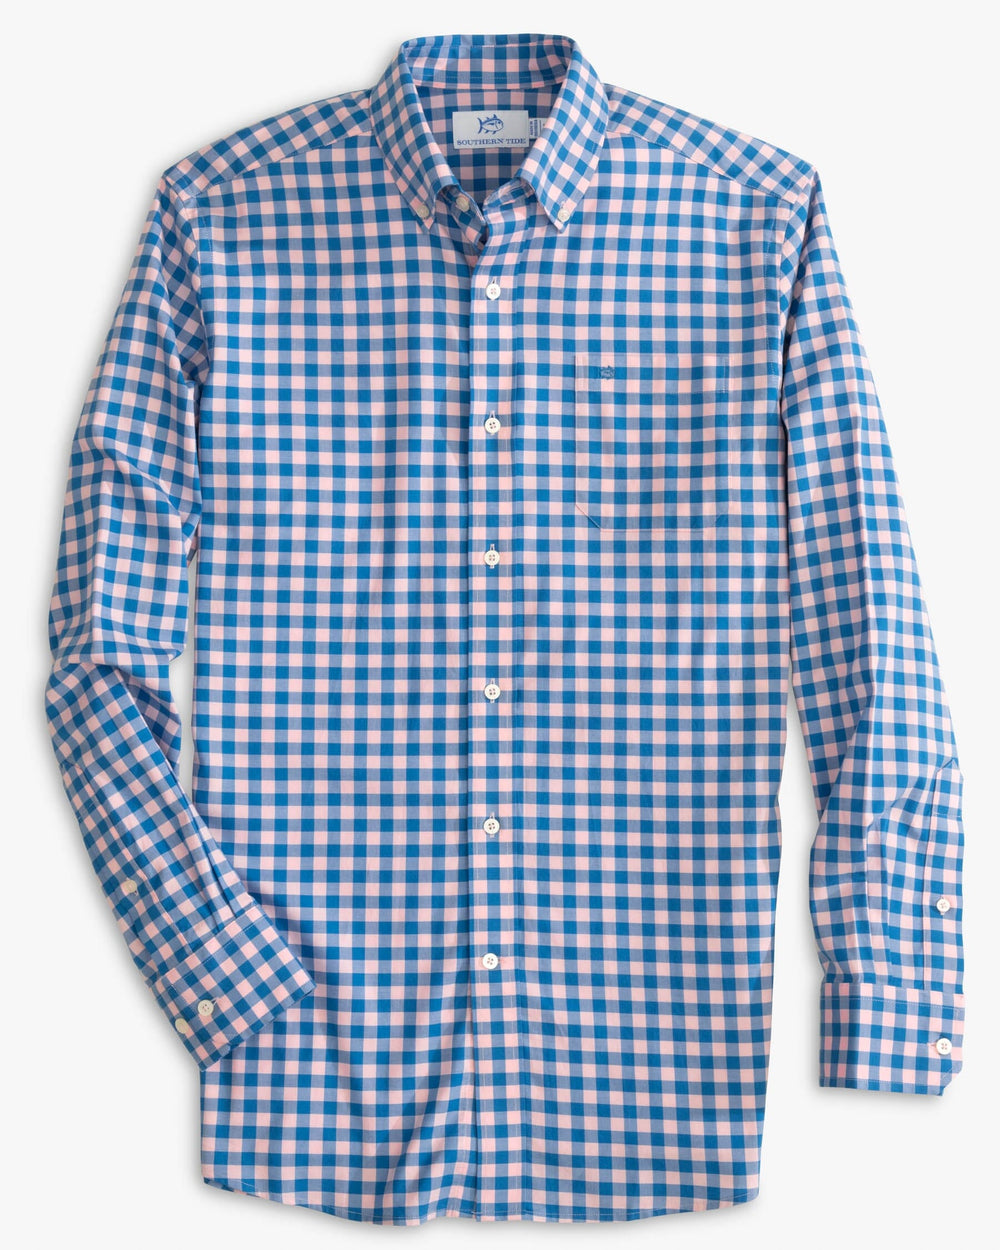 The front view of the Southern Tide Skipjack Lautner Gingham Intercoastal Sport Shirt by Southern Tide - Rose Blush